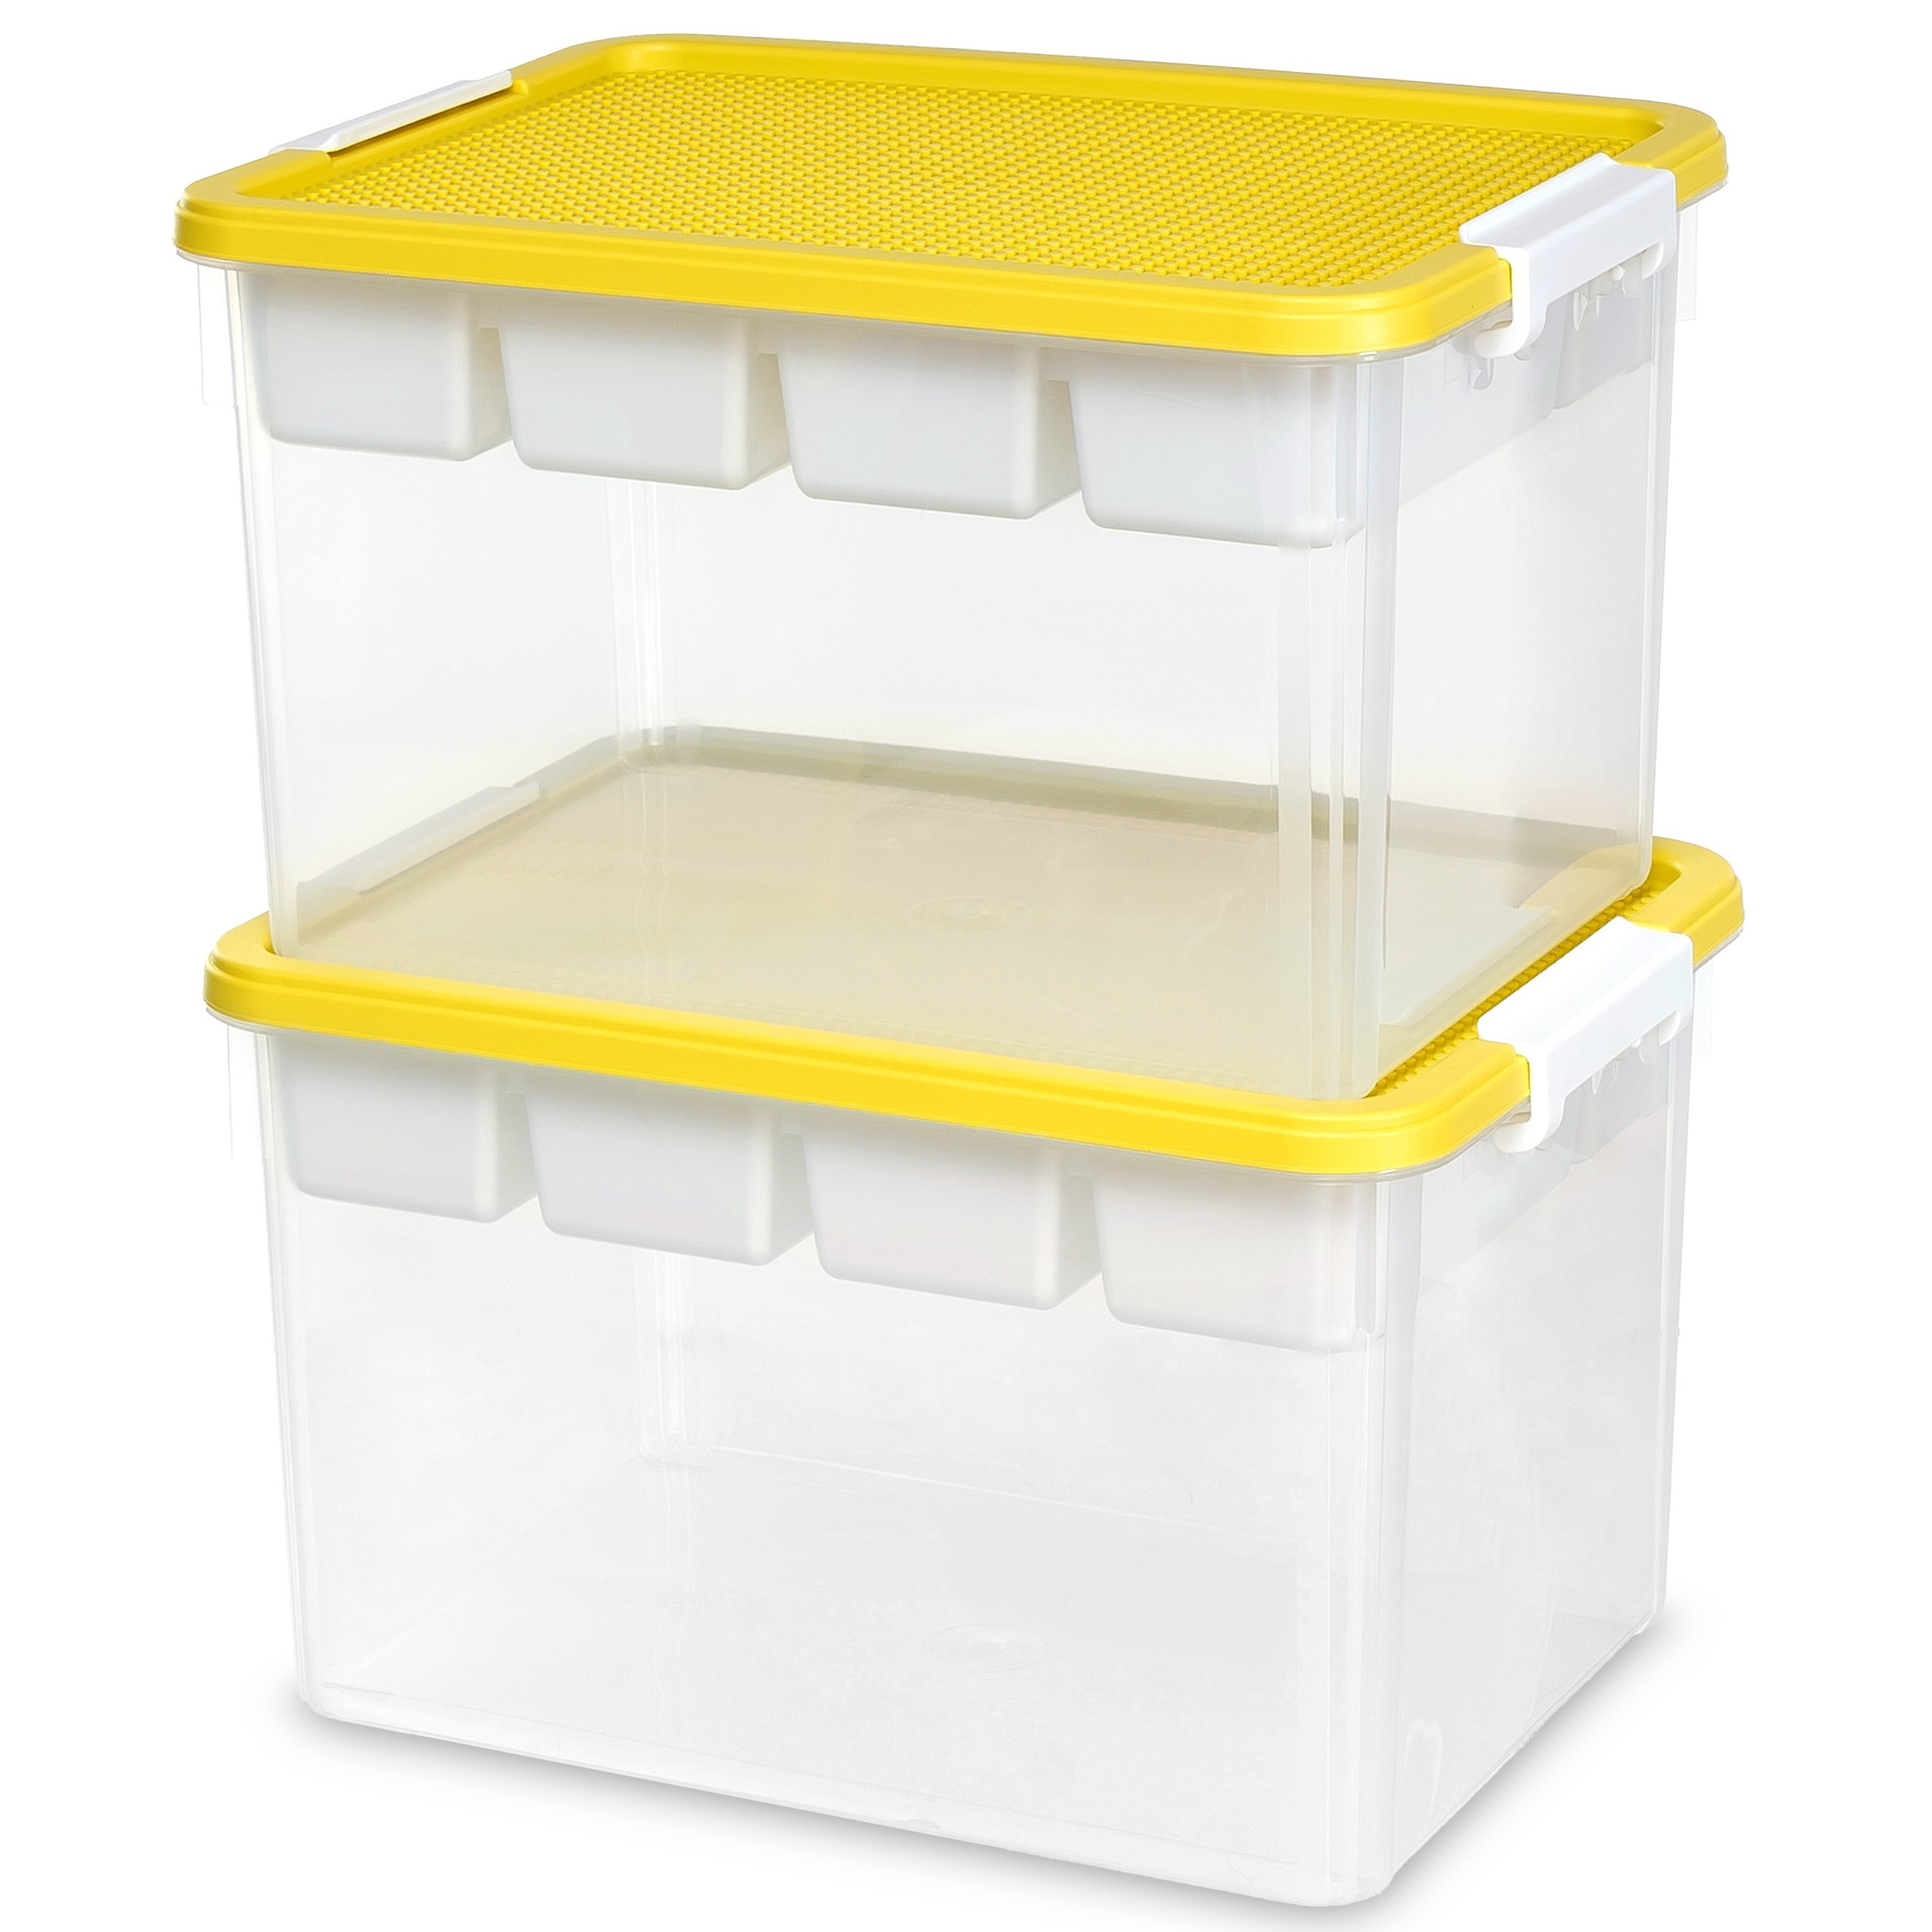 

Itylife 2pcs Toys Storage Organizer Bins, With Building Baseplate Lid And Removable Tray, 32 Quart Large Toy Box, Clear Storage Container For Organizing Kids Building Blocks, Storage Supplies